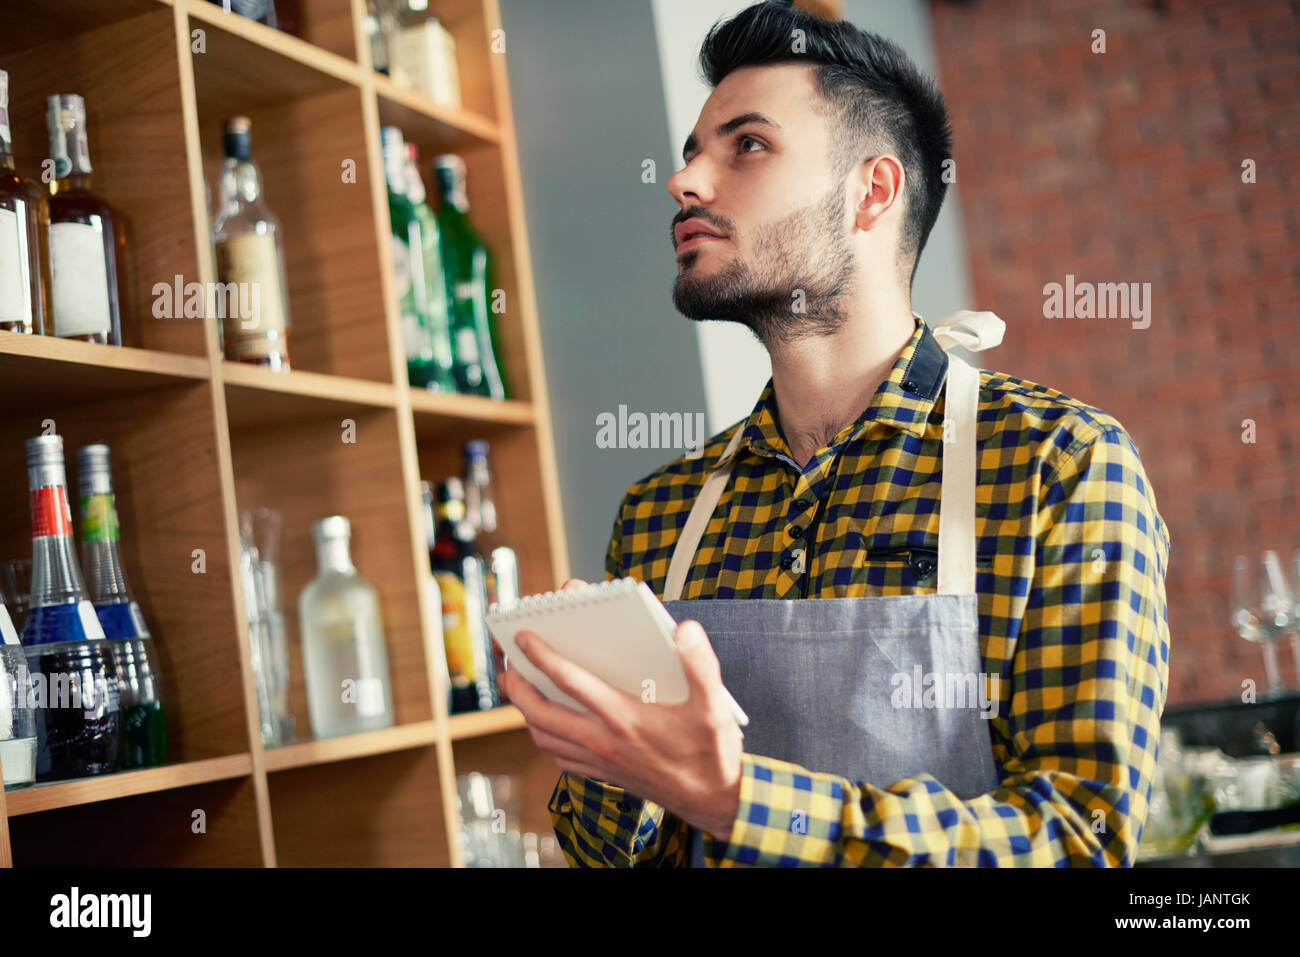 Bartender doing an inventory of the products Stock Photo